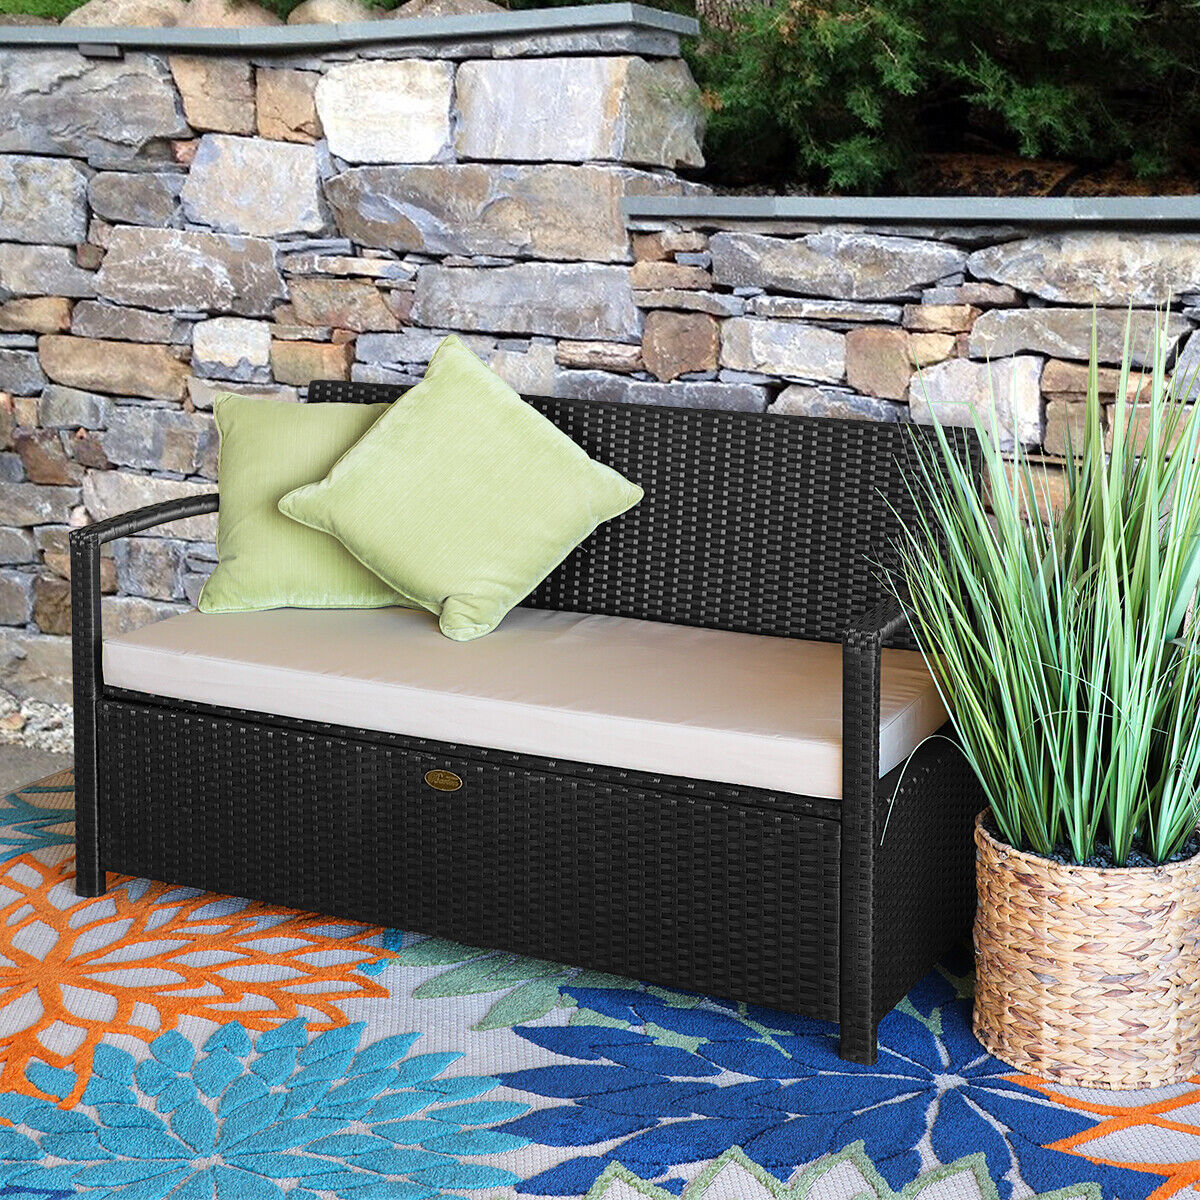 Black Deck Storage Box Bench With Seat Cushion Outdoor Patio Furniture